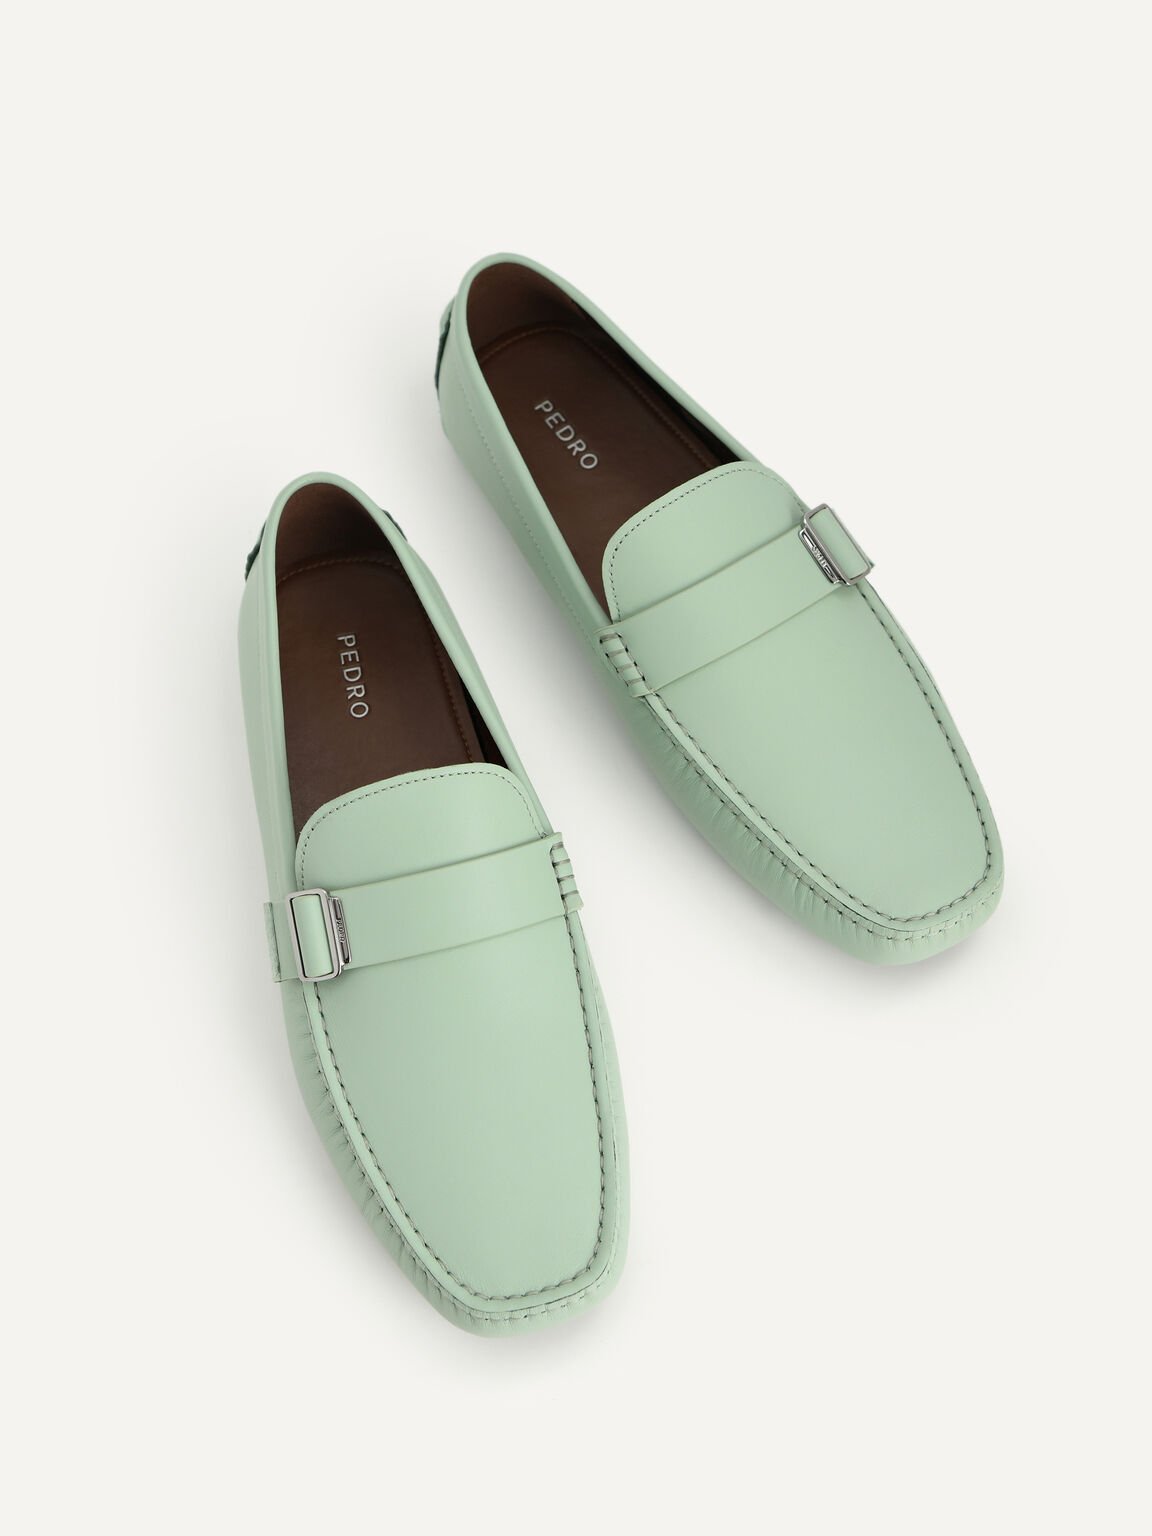 Leather Moccasins with Buckle Detail, Light Green, hi-res